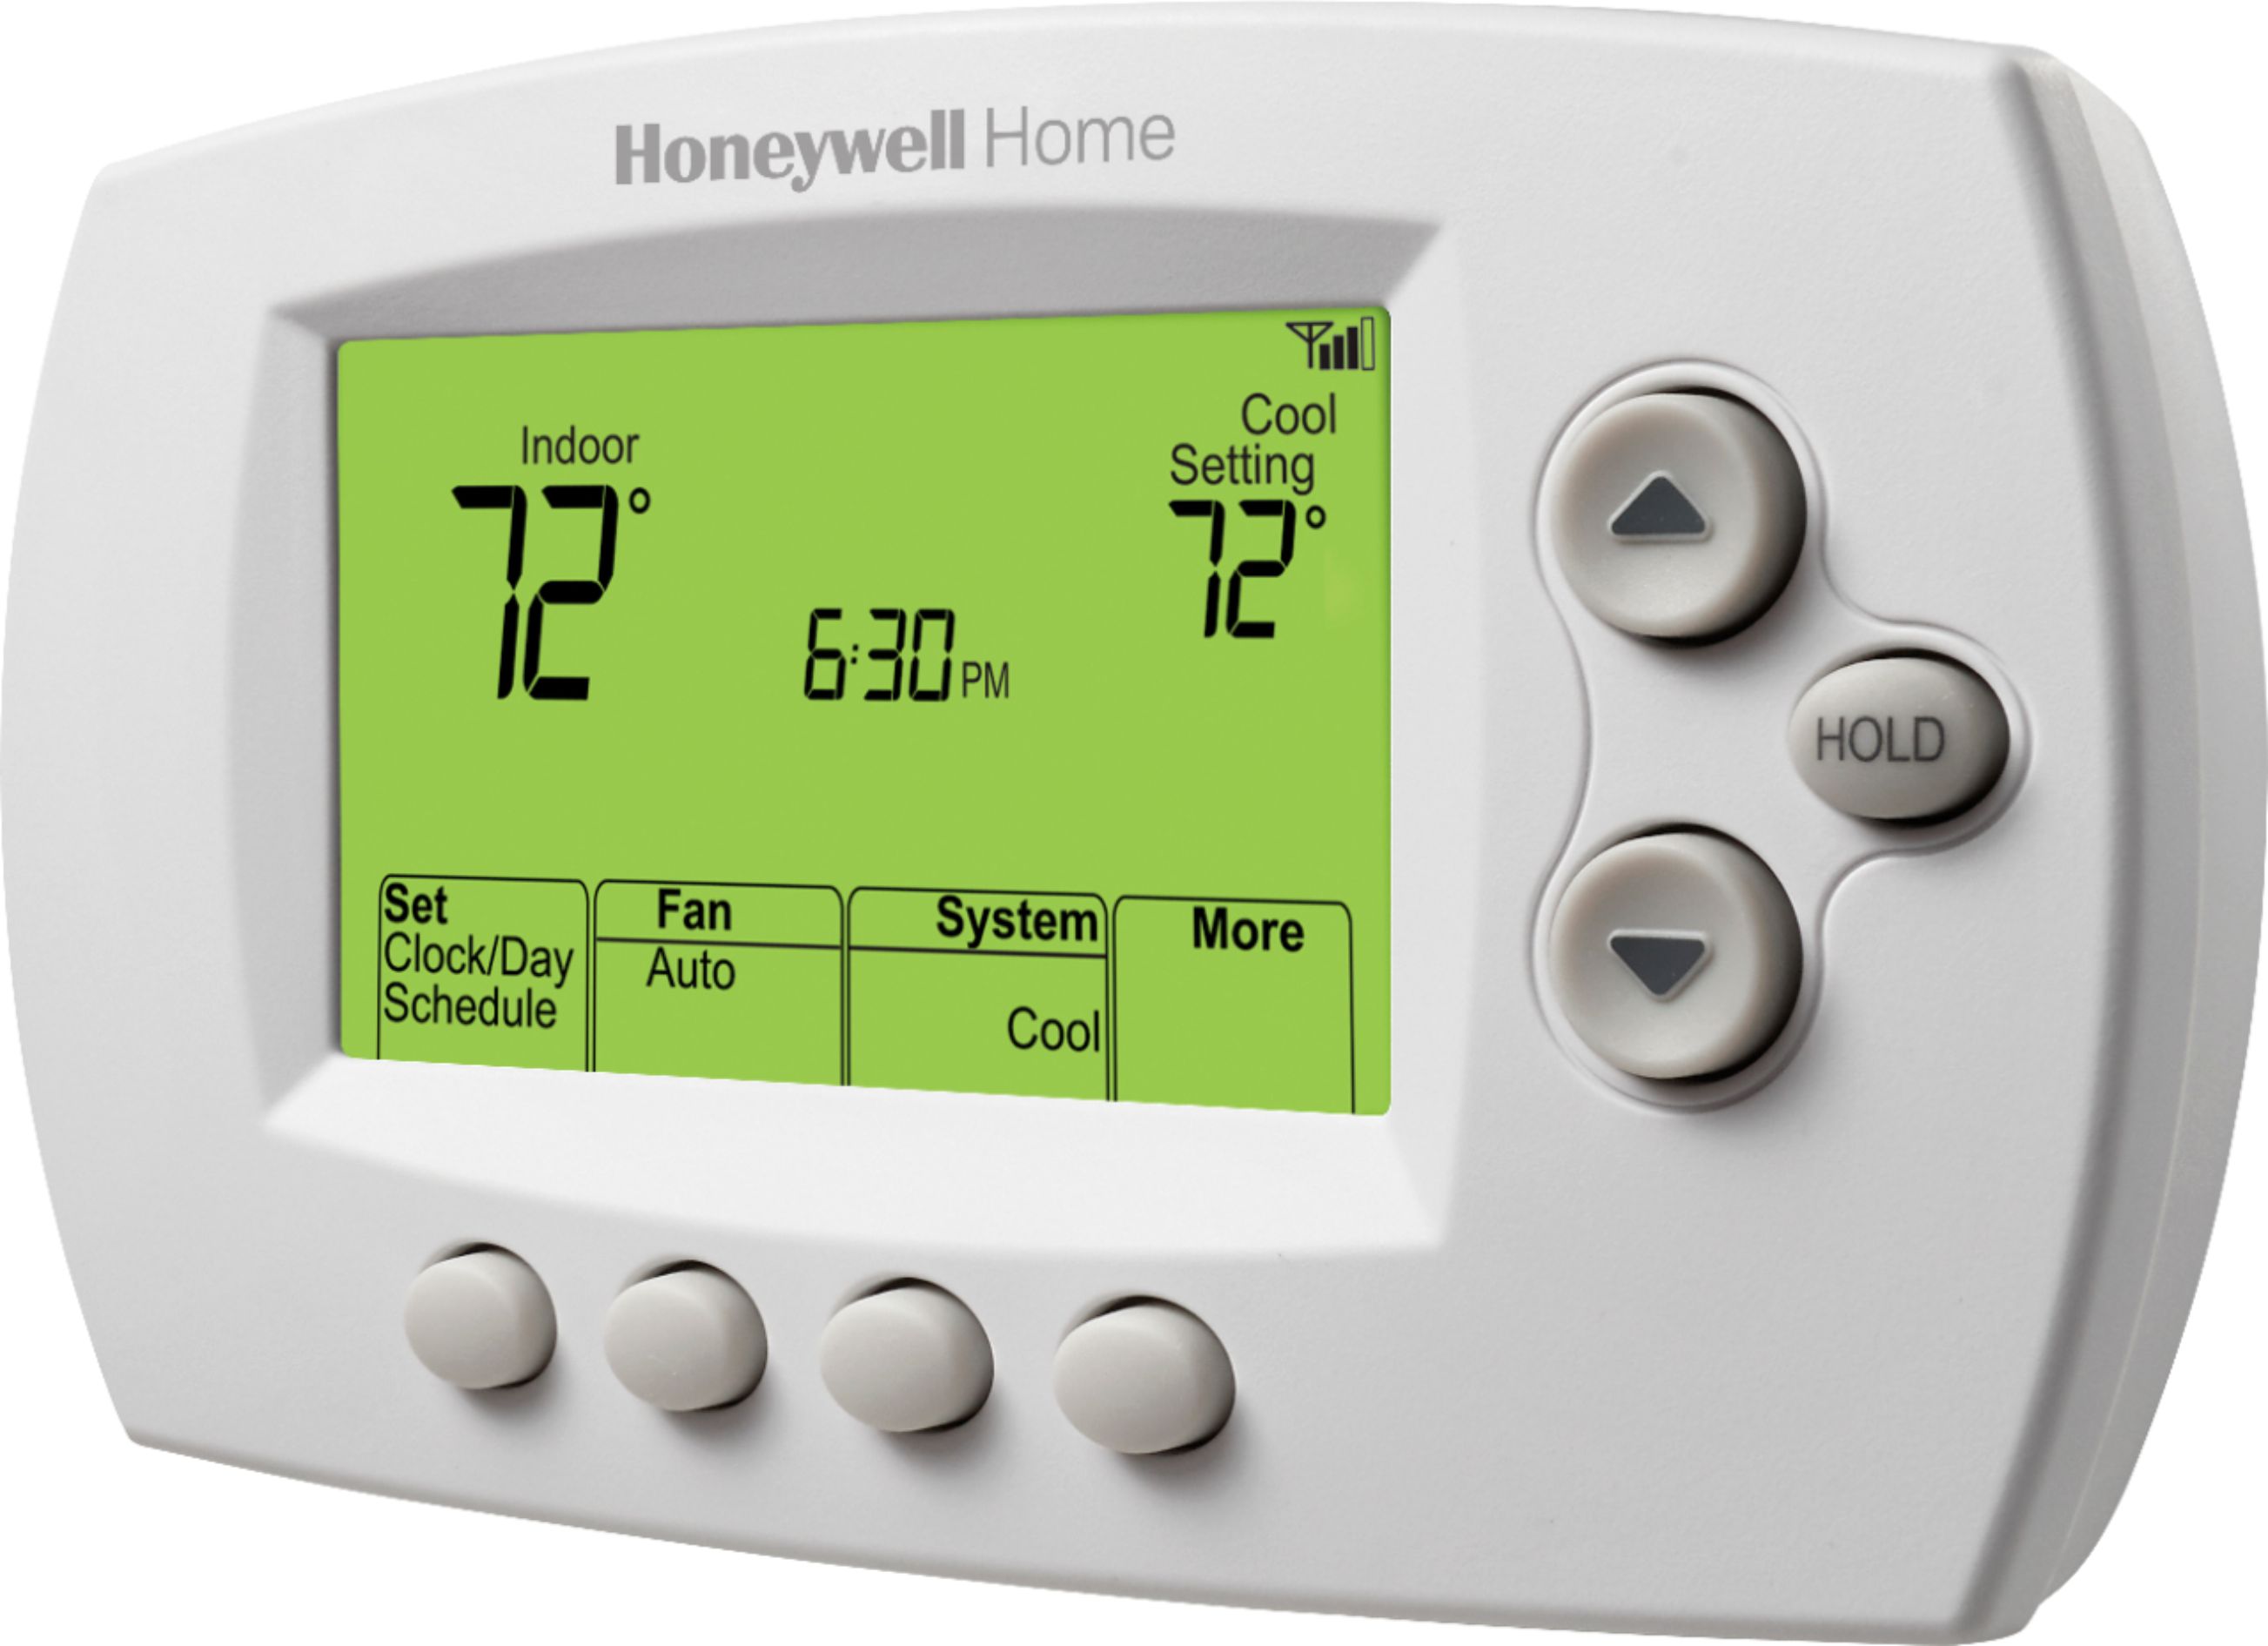 why-does-my-honeywell-smart-thermostat-display-the-wrong-temperature